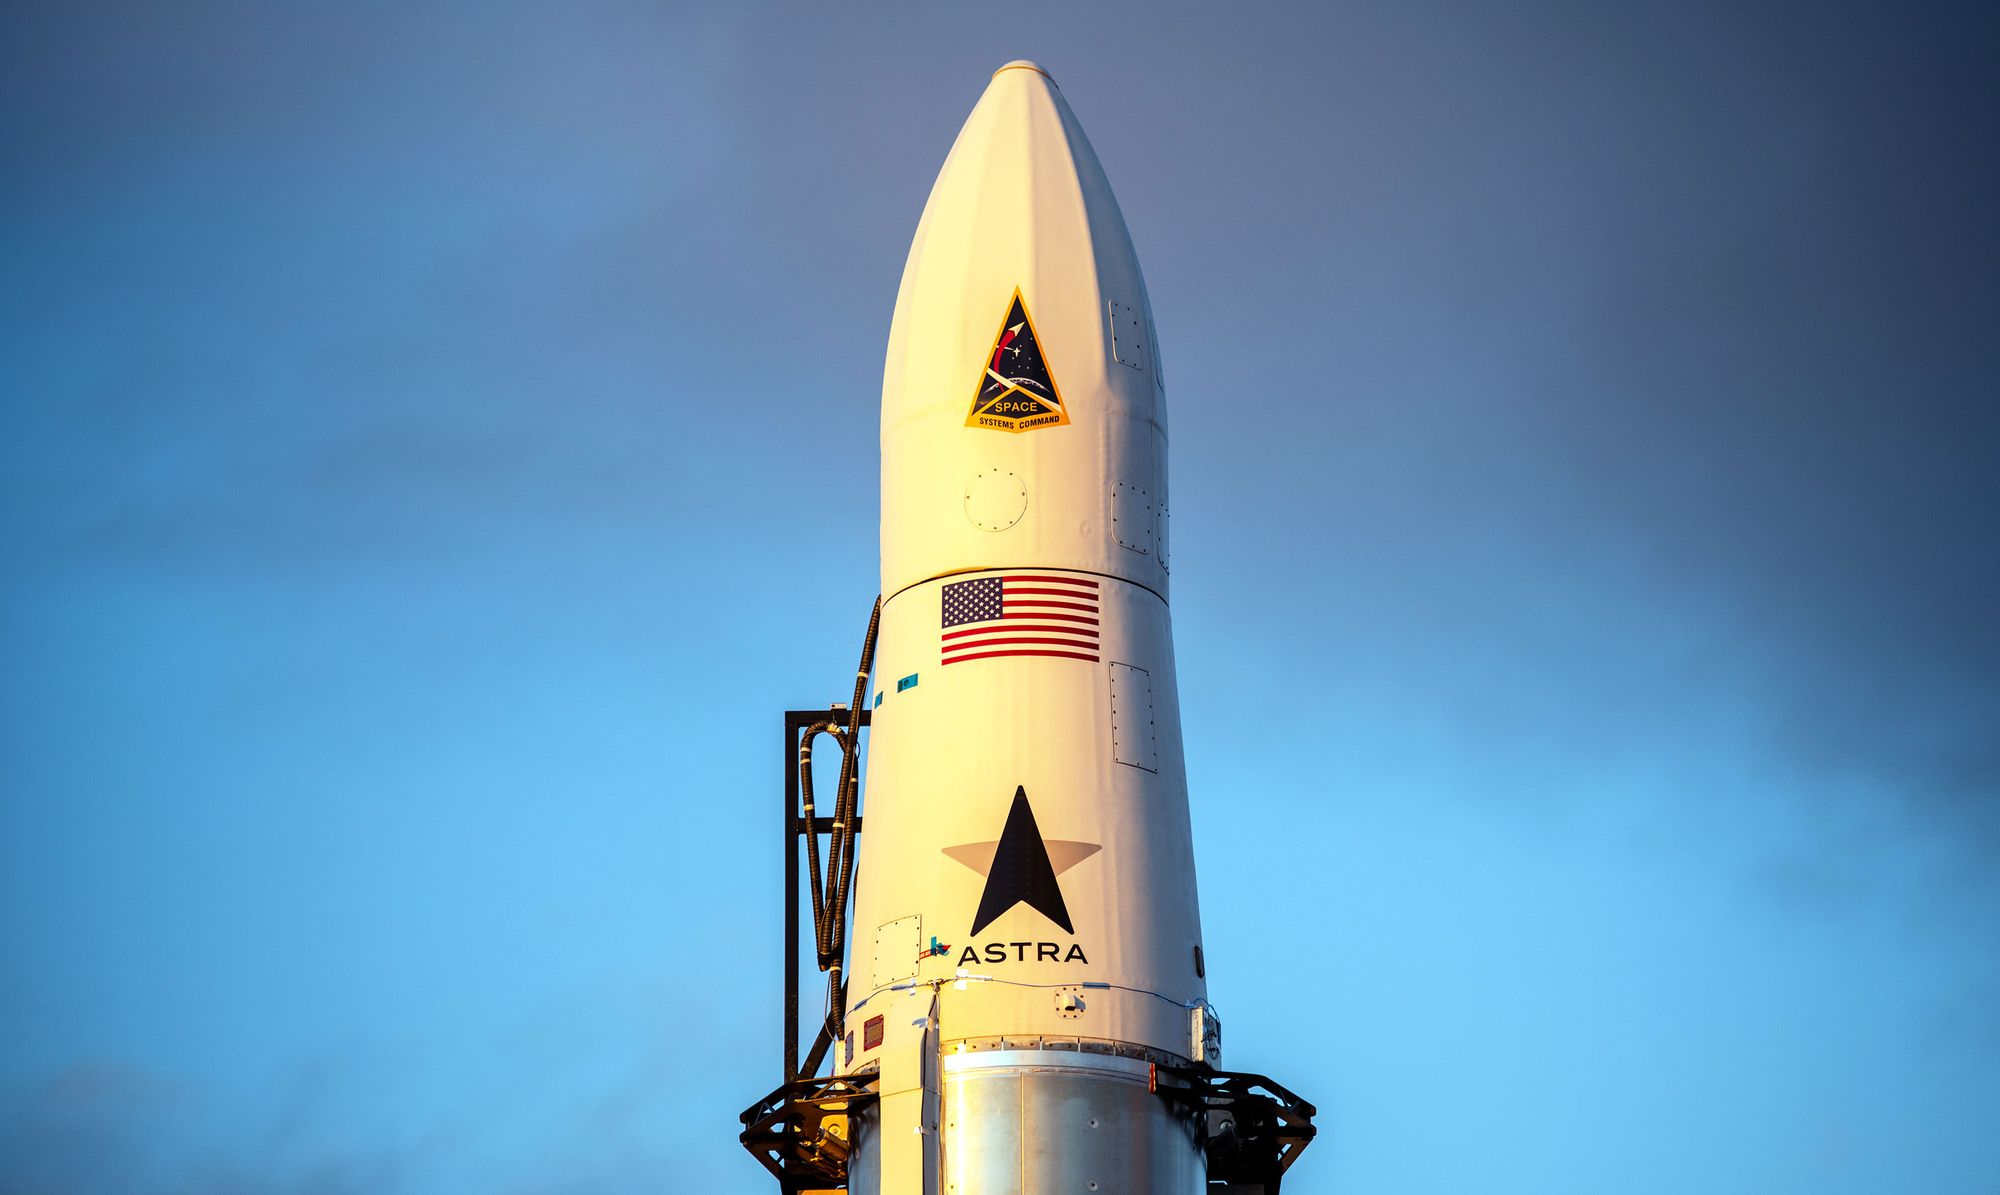 Astra's rocket 3 on its launch pad. ©Astra